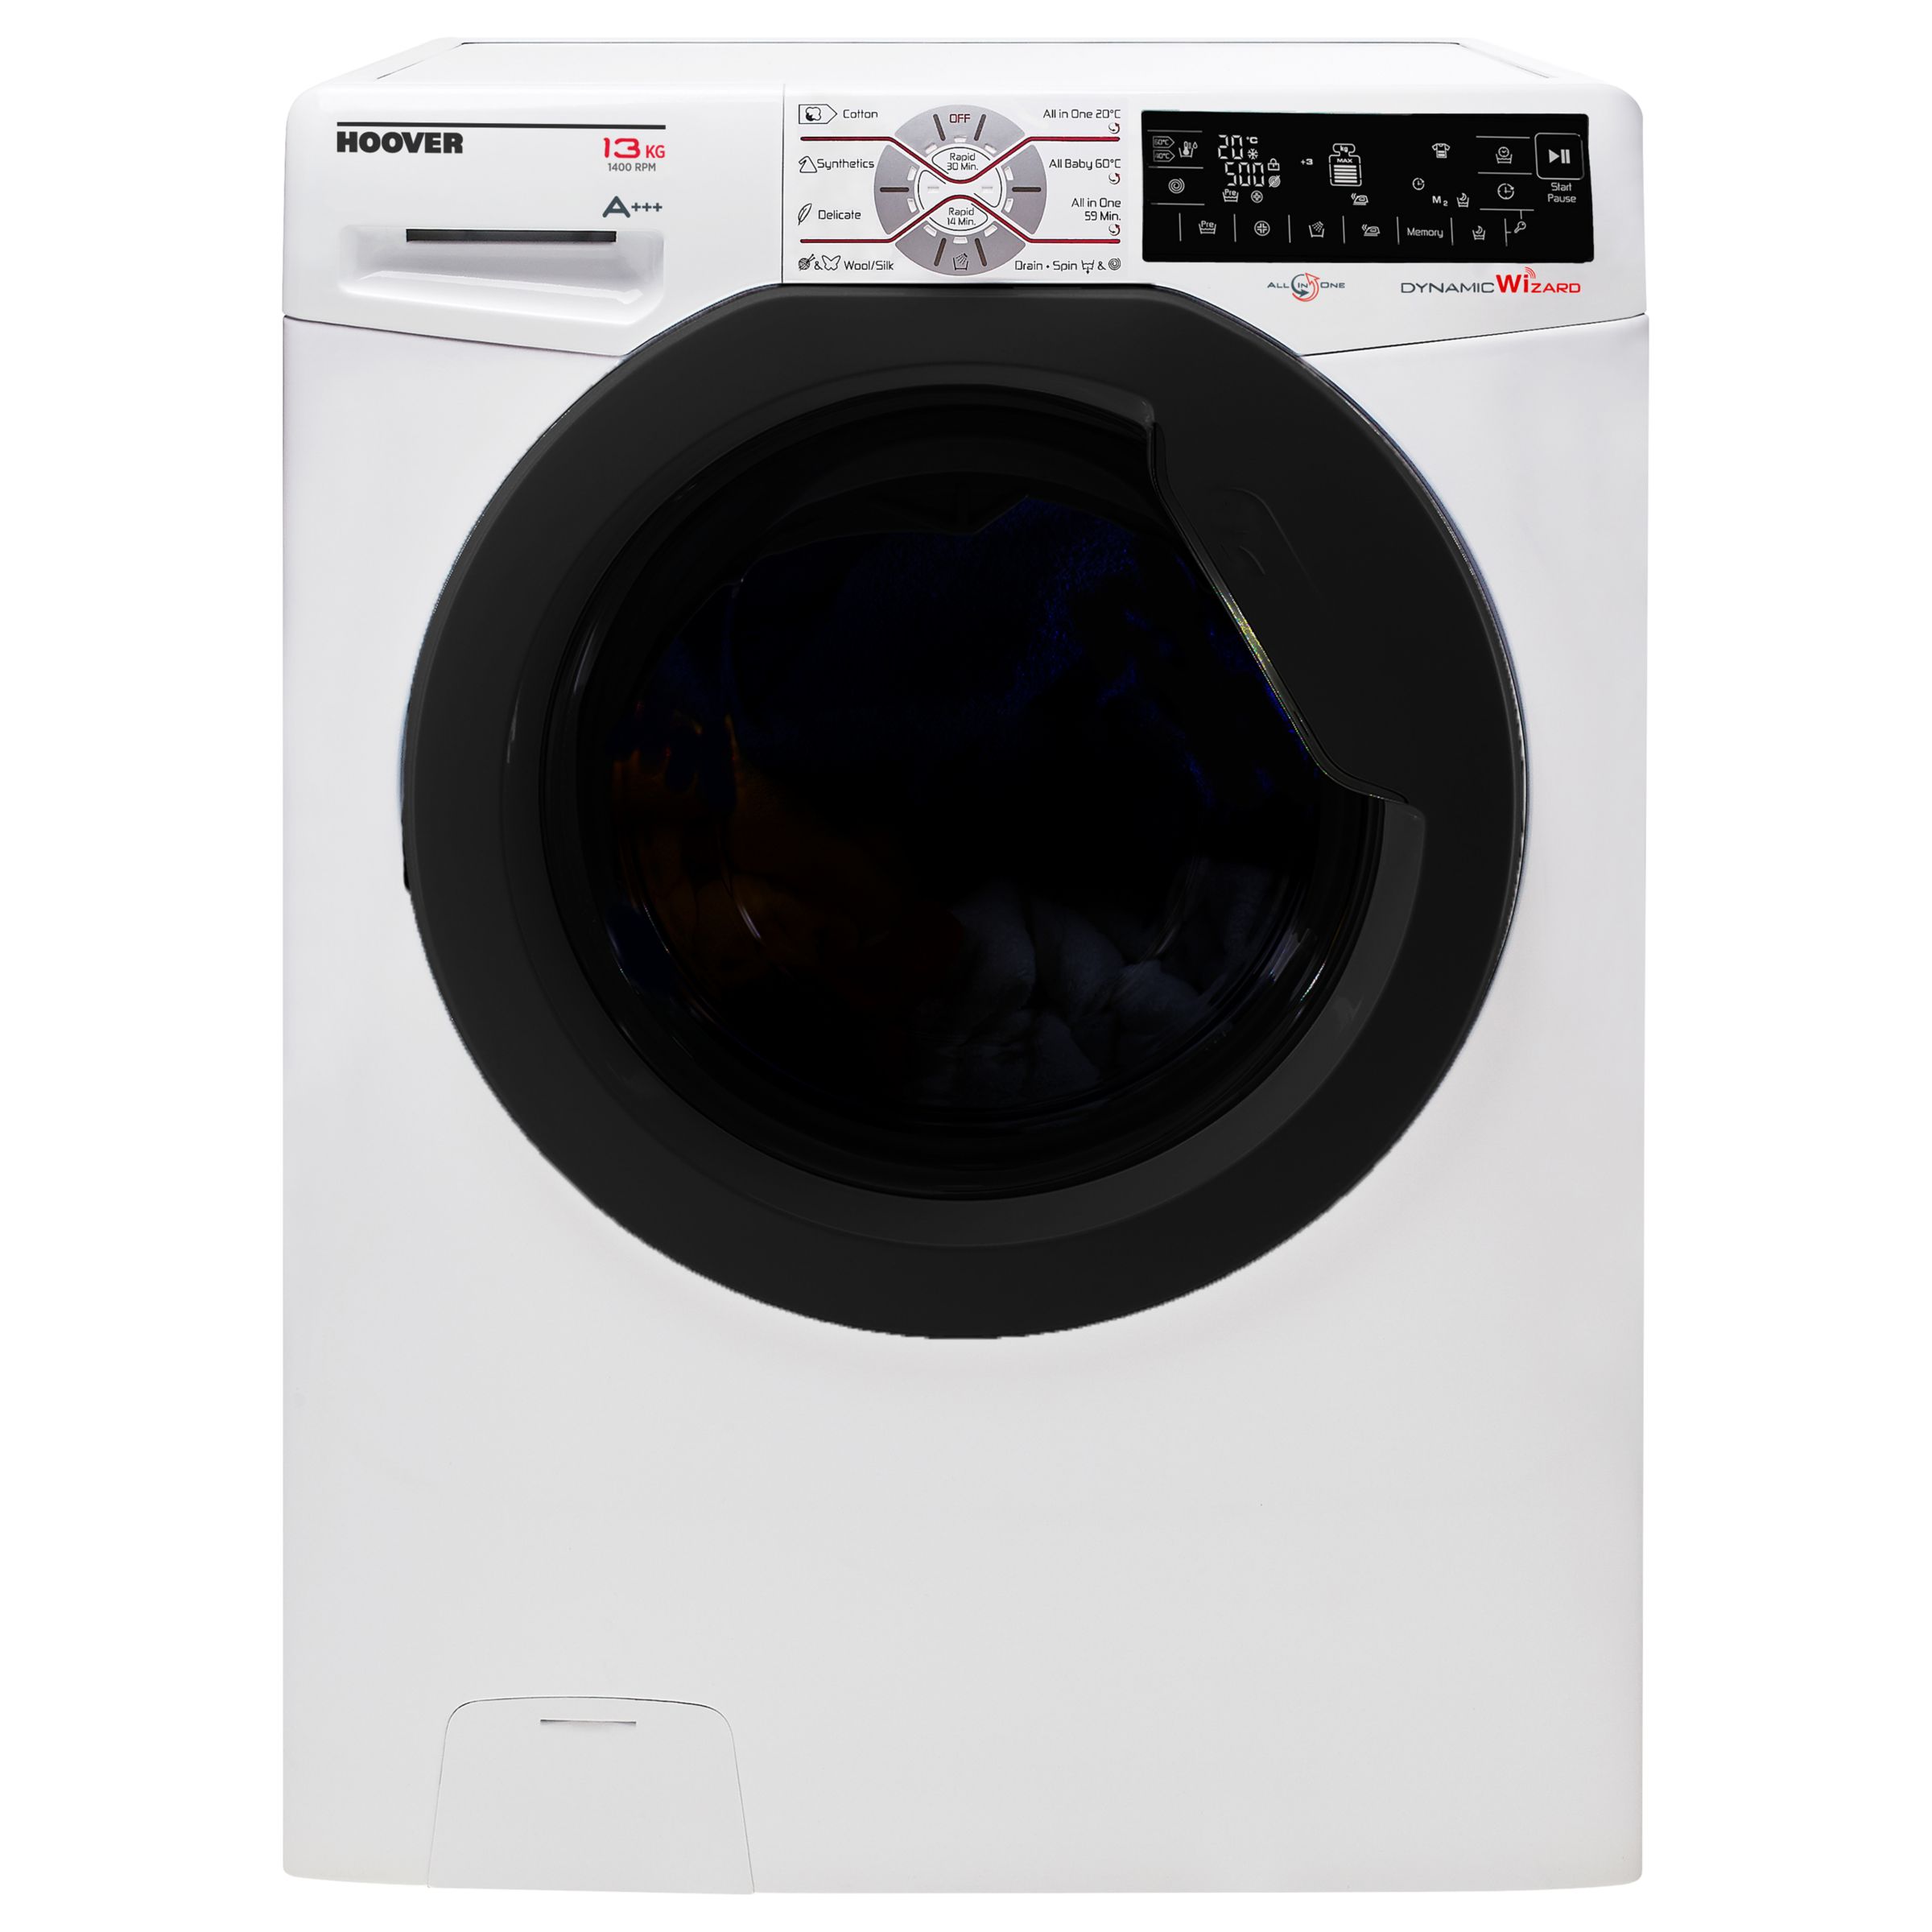 Hoover DWFT413AH3 Freestanding Washing Machine, 13kg Load, A+++ Energy Rating, 1400rpm Spin, White